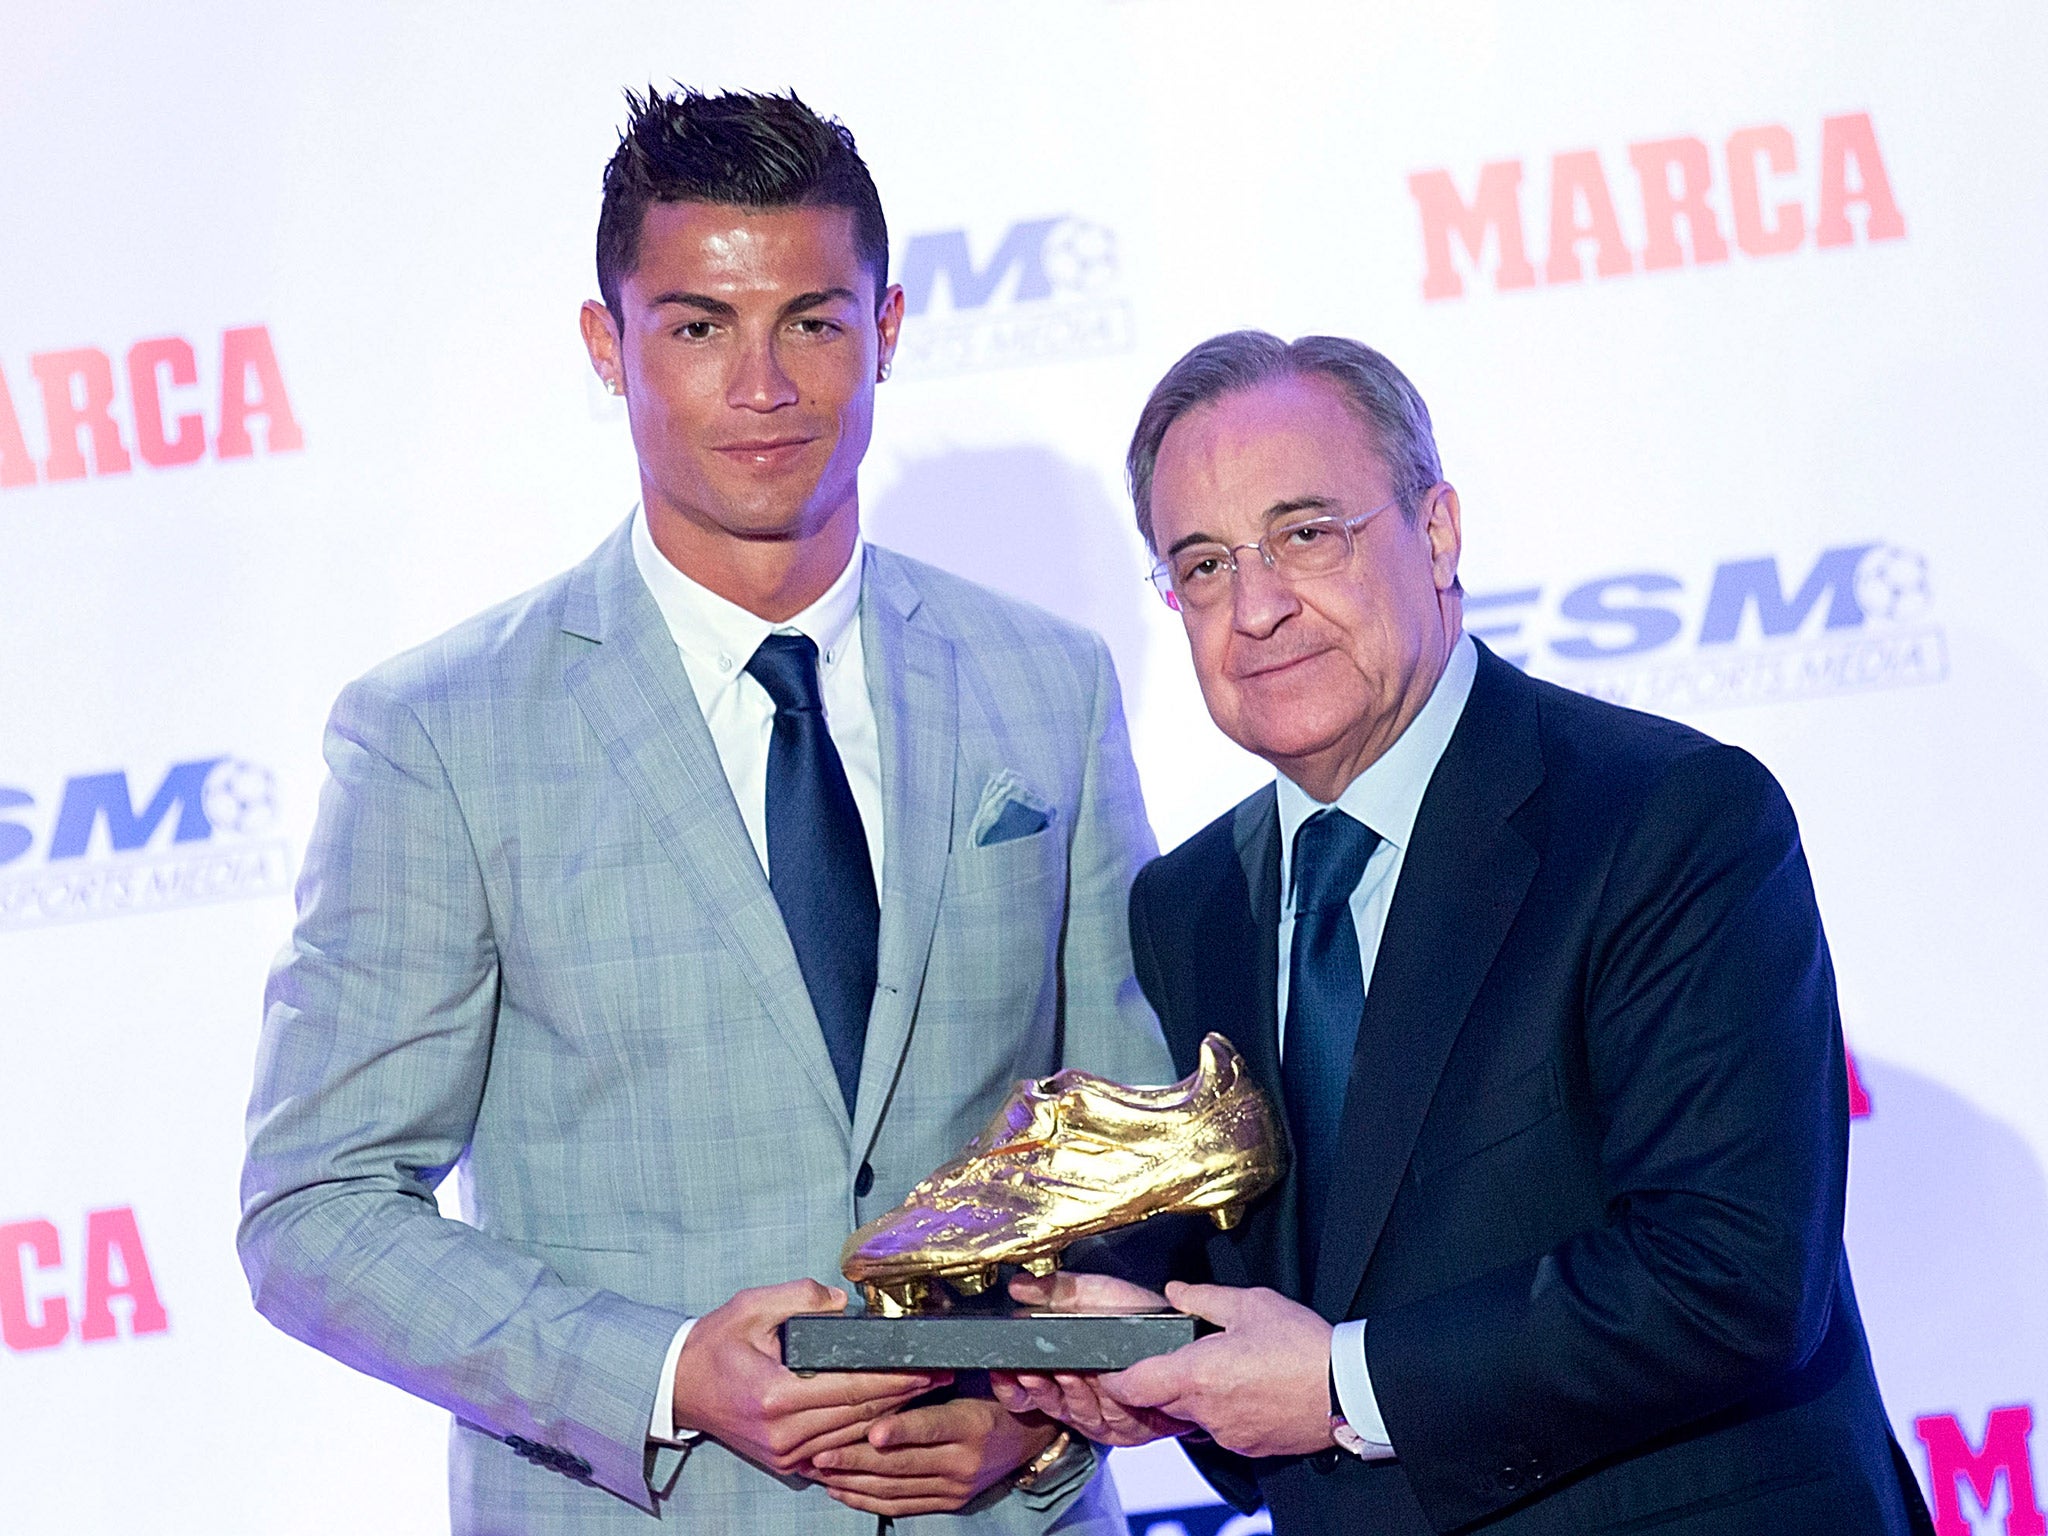 Cristiano Ronaldo is given the Golden Boot award this week